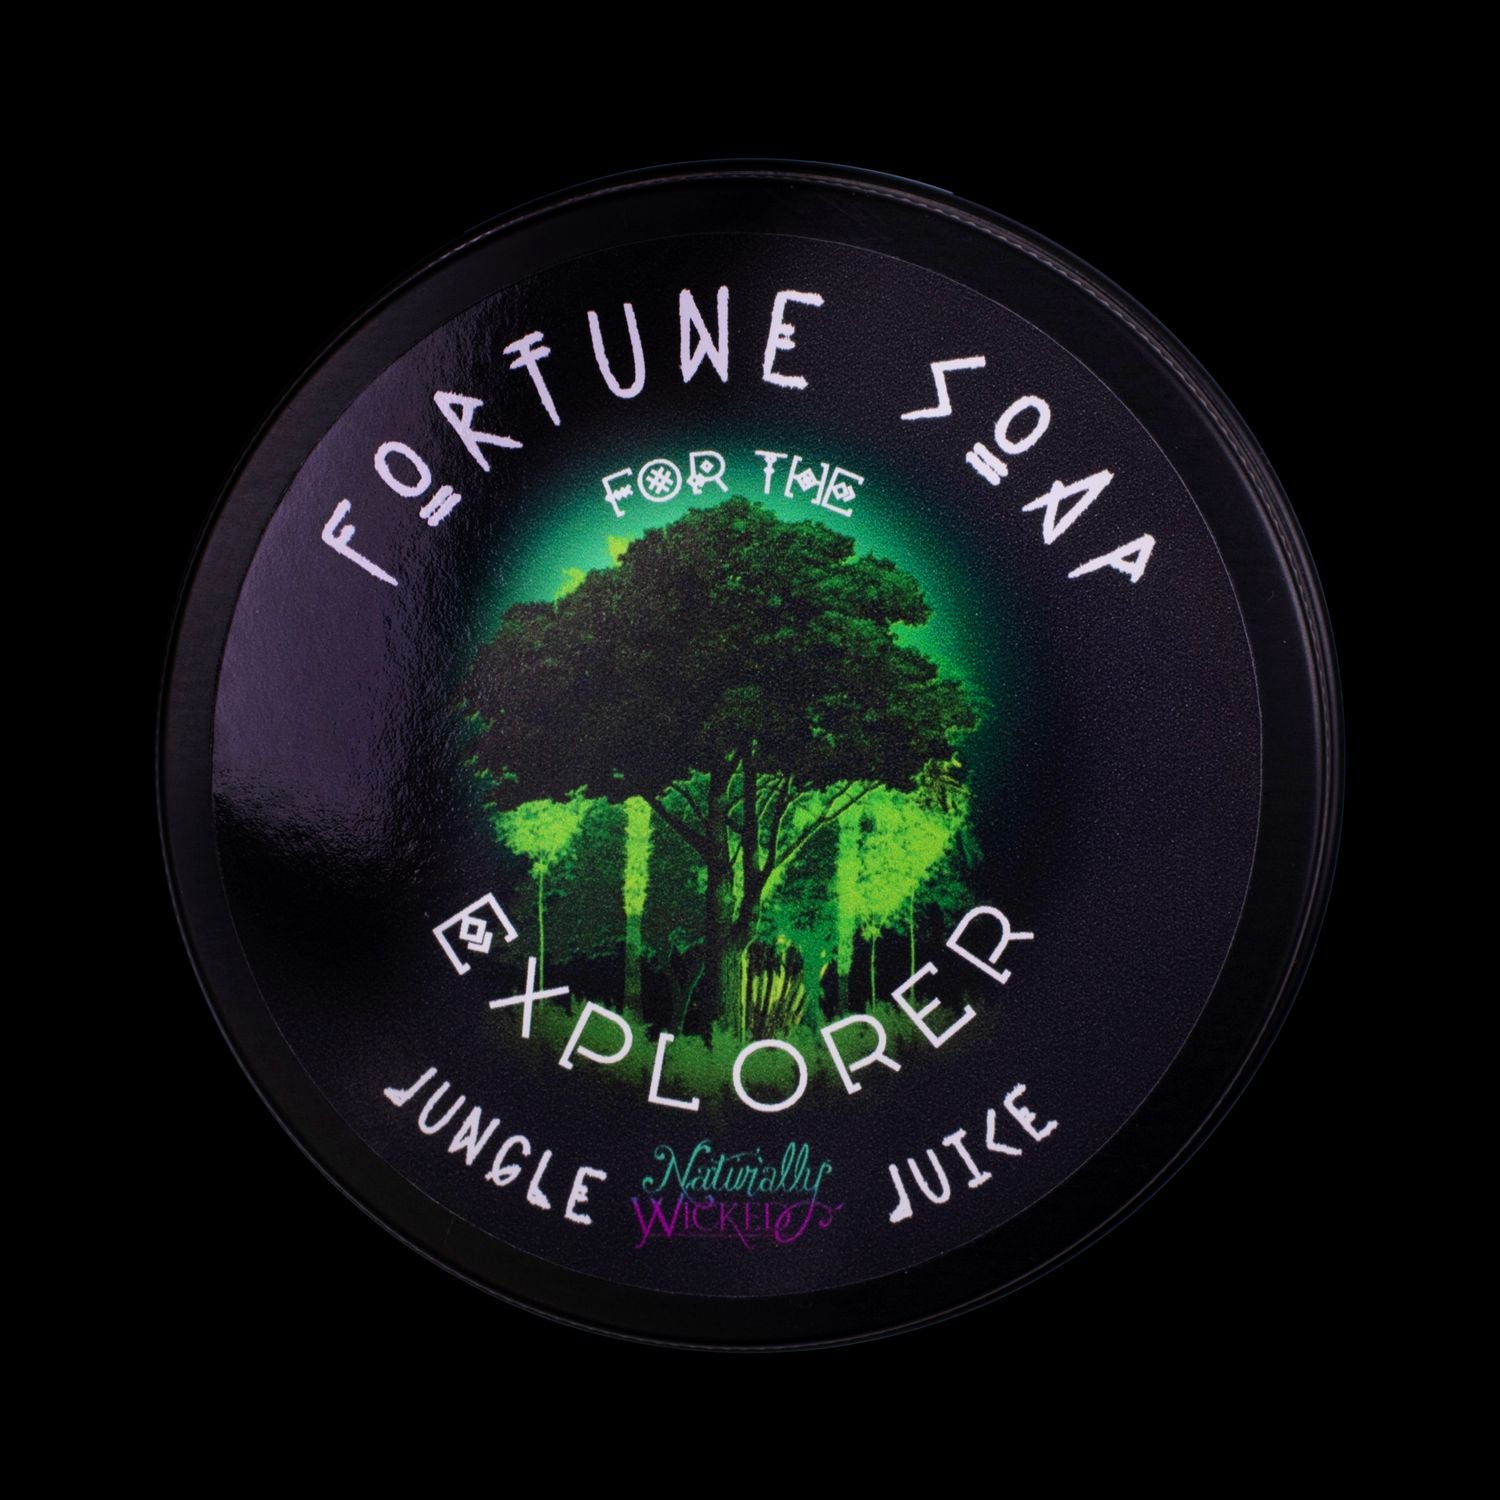 Naturally Wicked Fortune Soap For The Explorer. Green Plant-based Soap With Aventurine Rune Crystal, Scented With Jungle Juice All Situated In A Black Glossy Gift Tin.